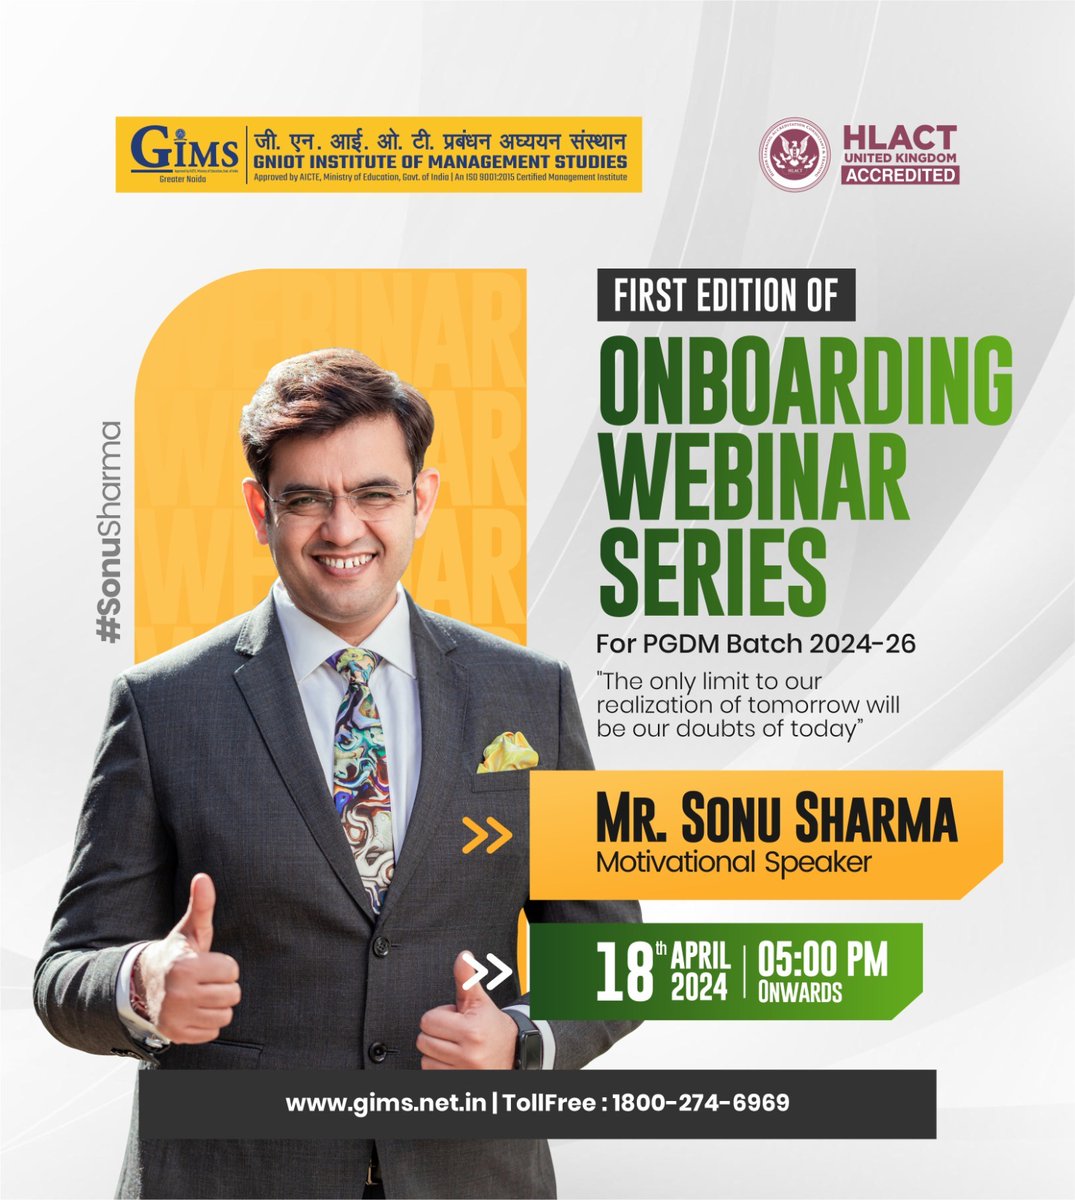 GNIOT Institute of Management Studies (GIMS), Greater Noida is delighted to announce the launch of First-Edition of  Onboarding Webinar Series for the upcoming PGDM Batch 2024-26, happening on 18th April, 2024.
#gniot #gims  #pgdm #gimsian #expertsession #onlinesession